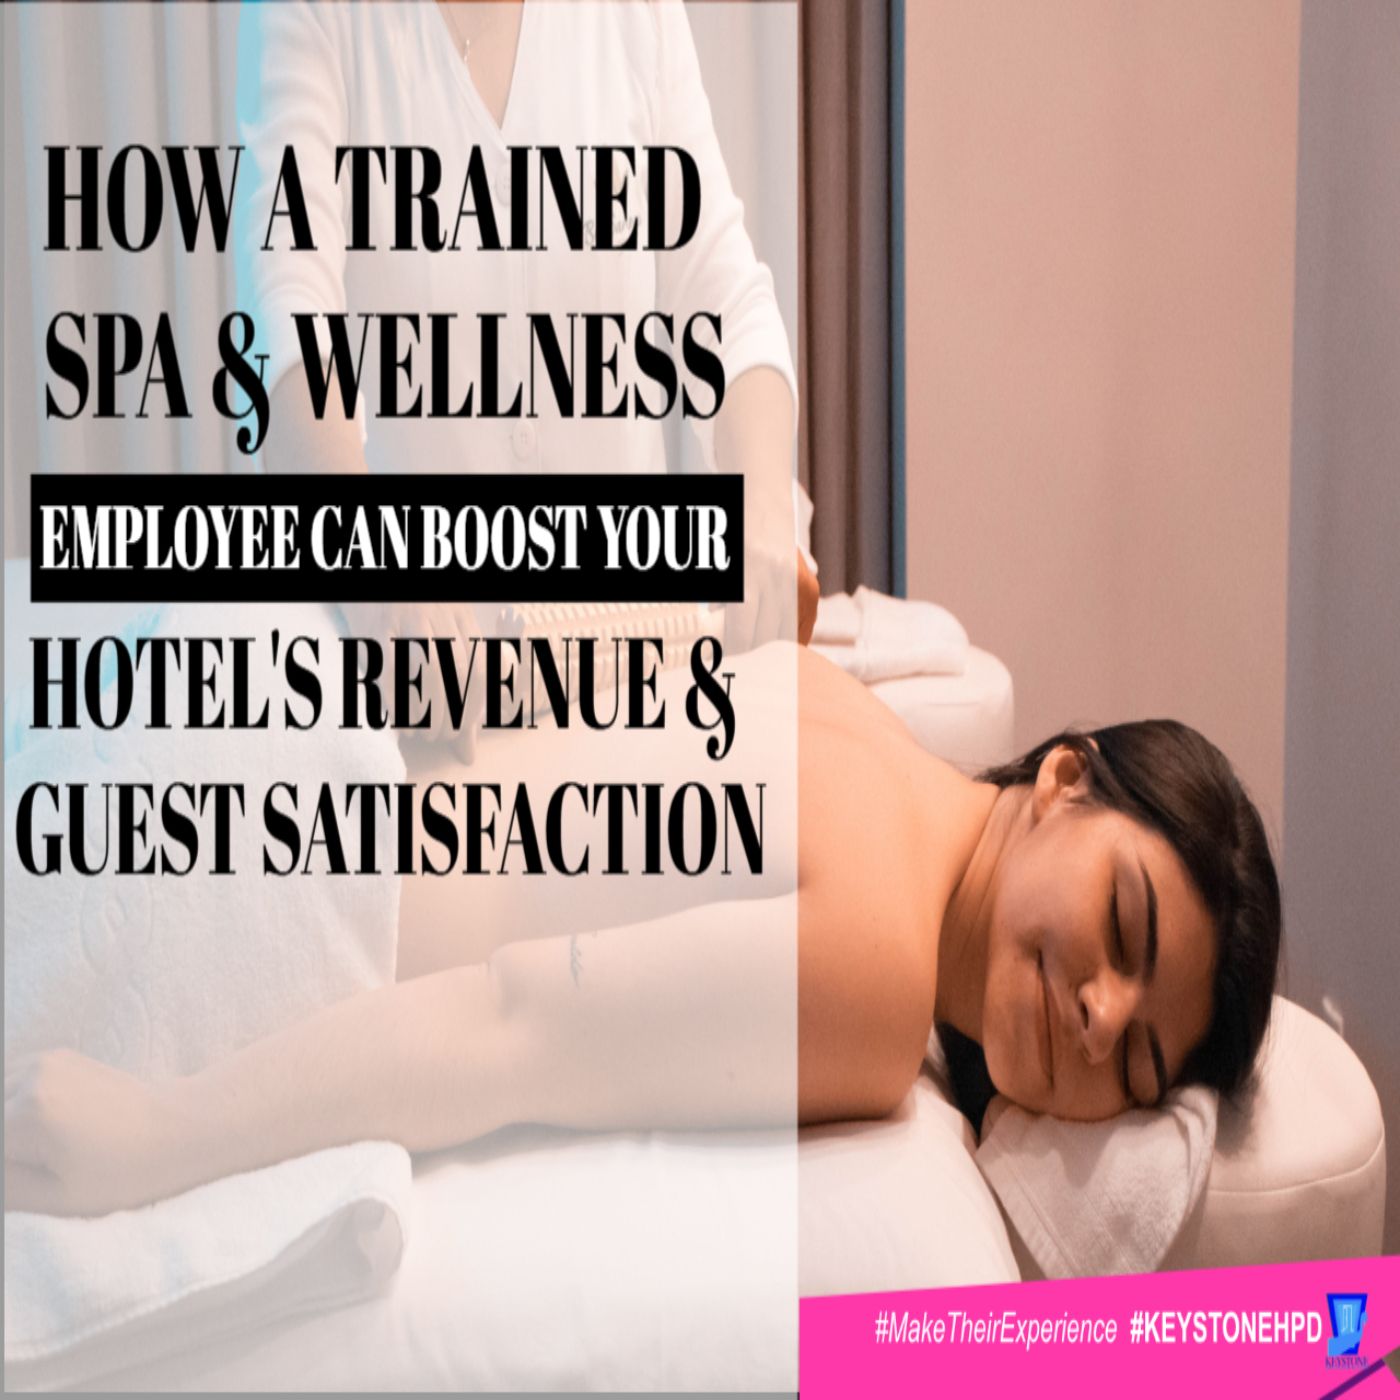 How Trained Spa & Wellness Employees Can Boost Your Hotel's Revenue & Guest Satisfaction | Eps. #349